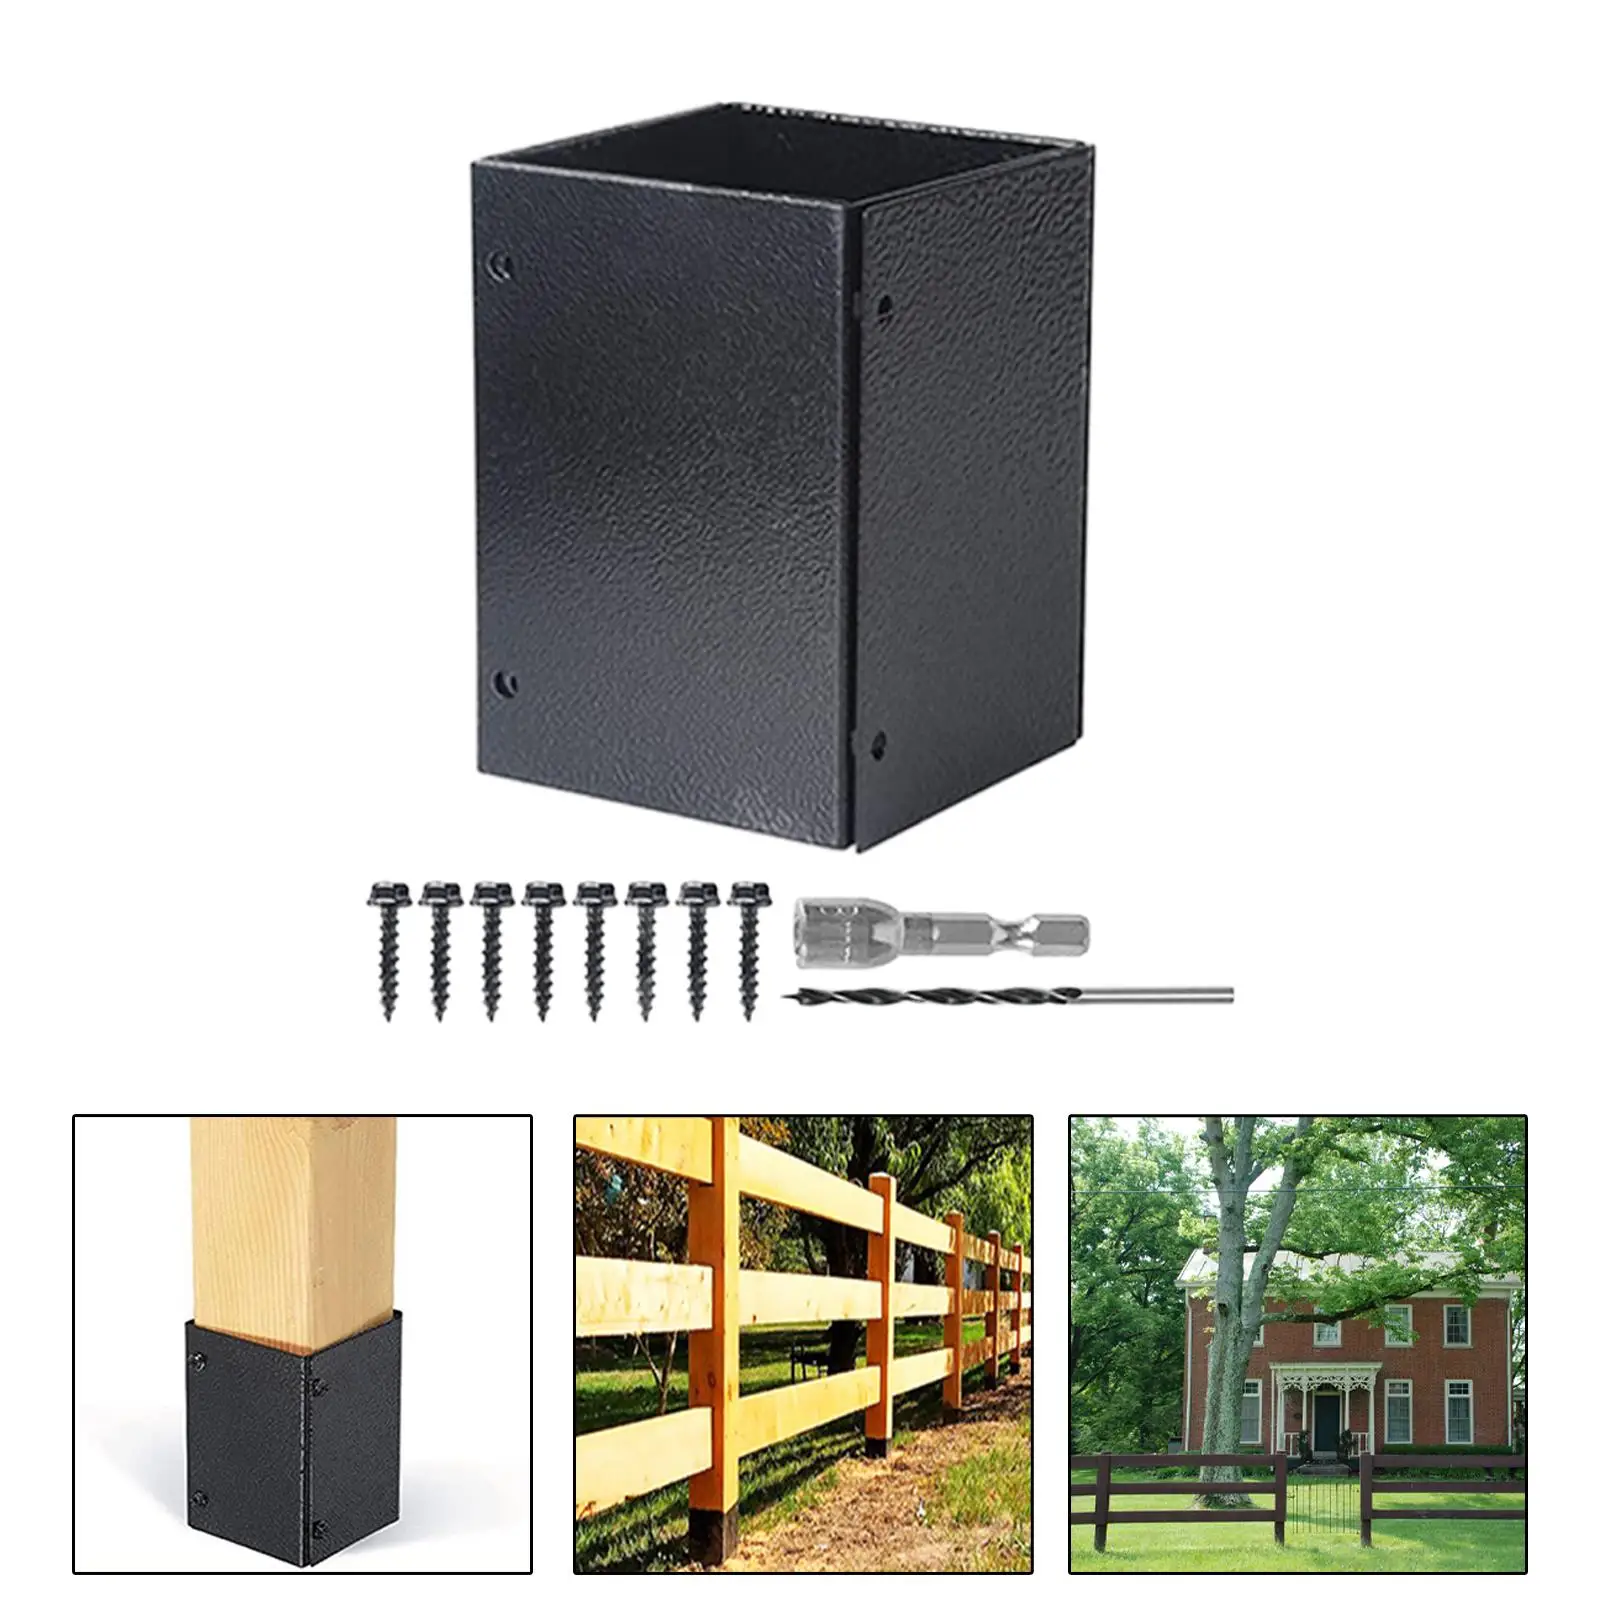 Post Bracket Protector Fence Adjustable Heavy Duty with Screws Stand Black Metal Deck Post Bracket Cover for Fence Base